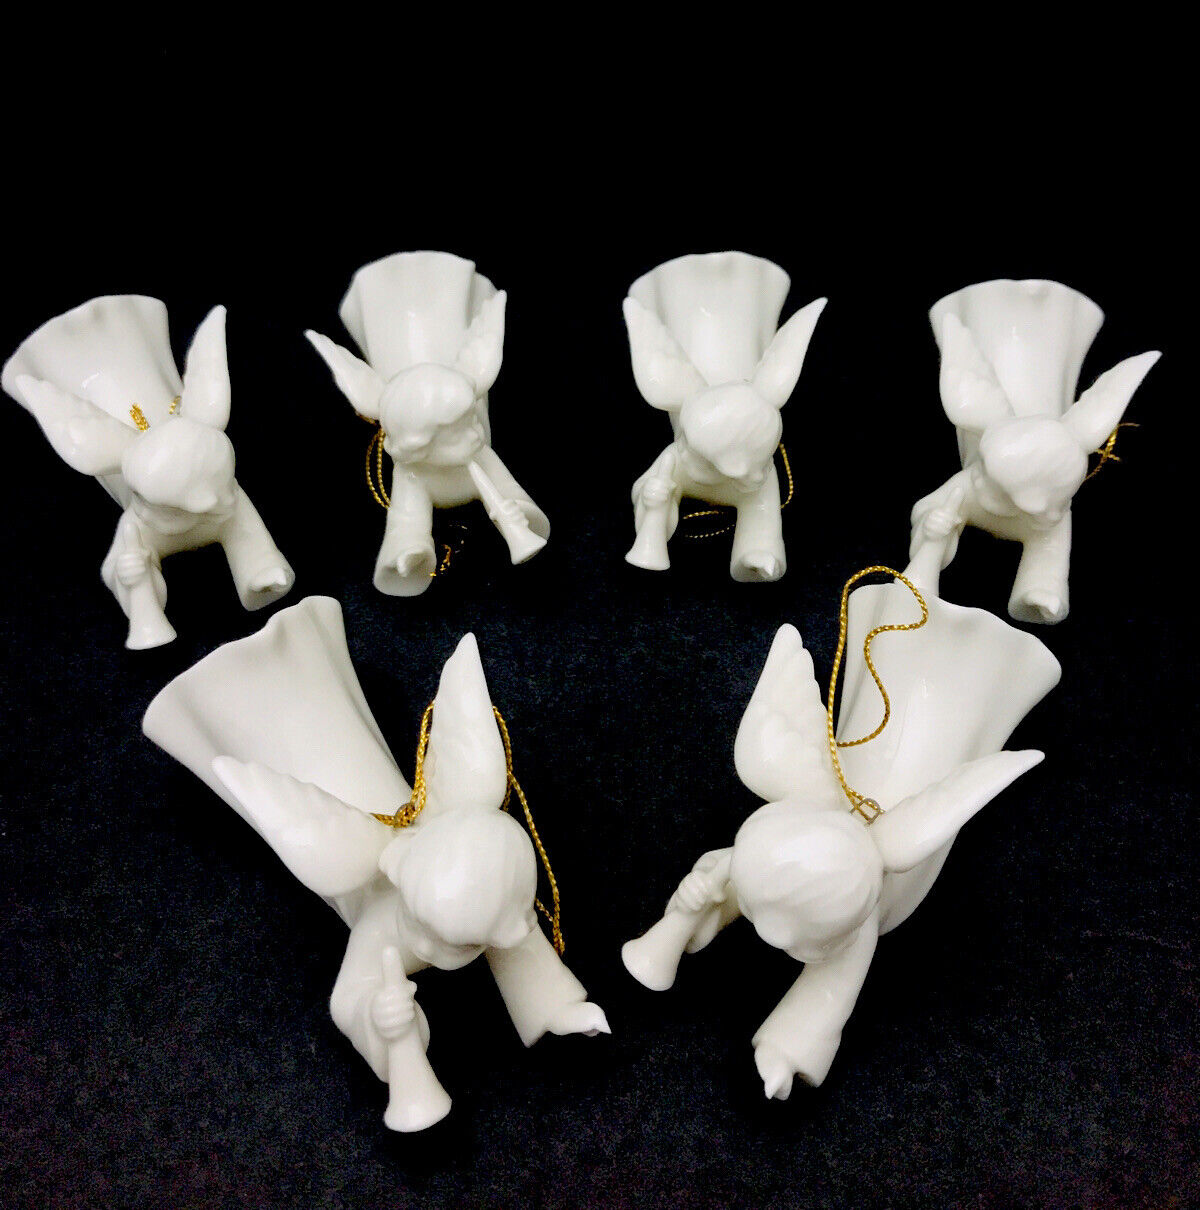 Vintage Bone China Angels Playing Trumpets Lot of 6 Christmas Ornament